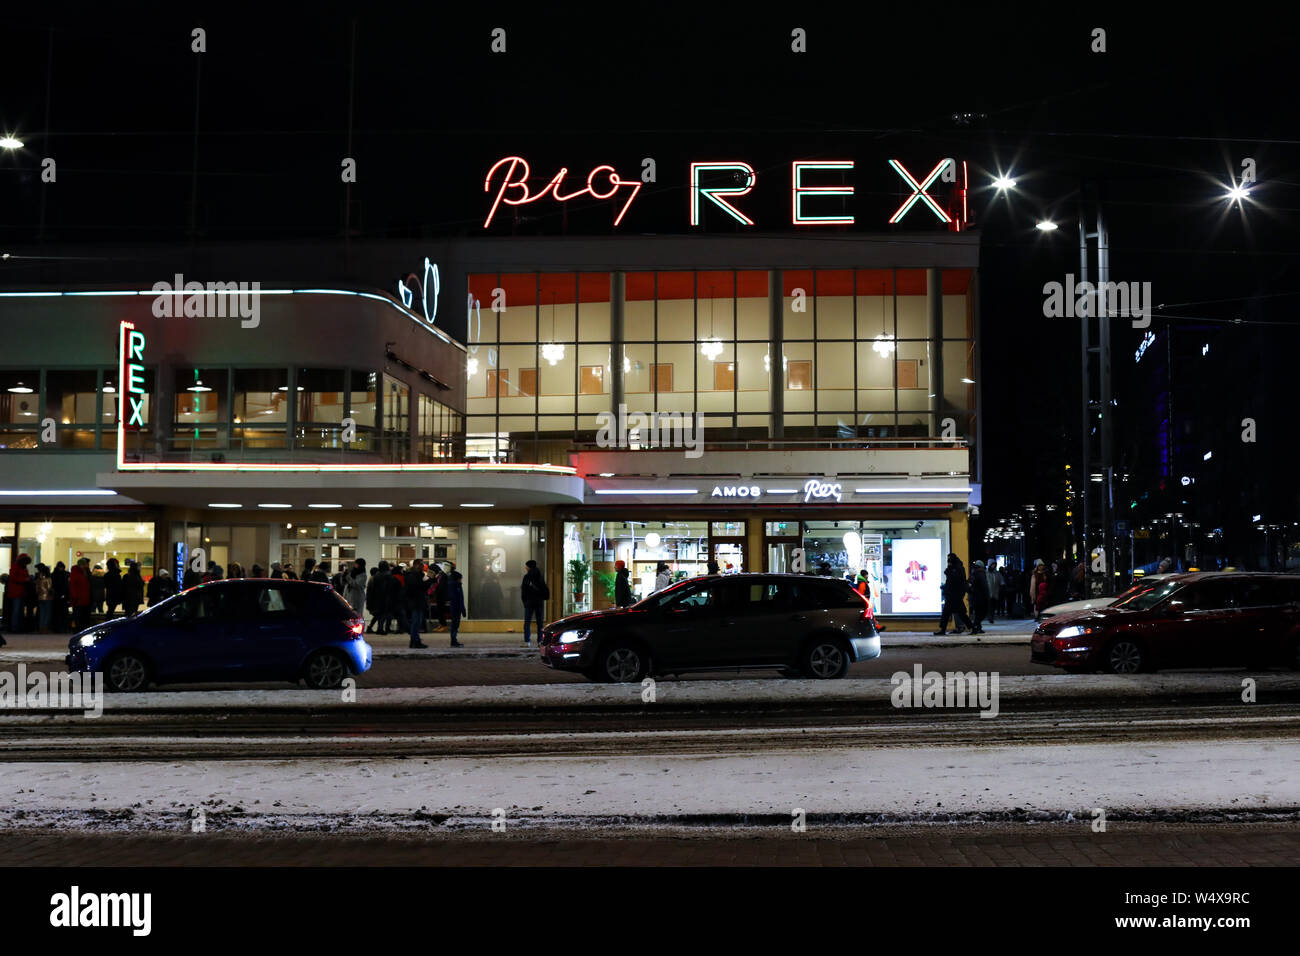 Iconic movie theater Bio Rex and new art museum Amos Rex at functionalist Lasipalatsi building in Helsinki, Finland Stock Photo